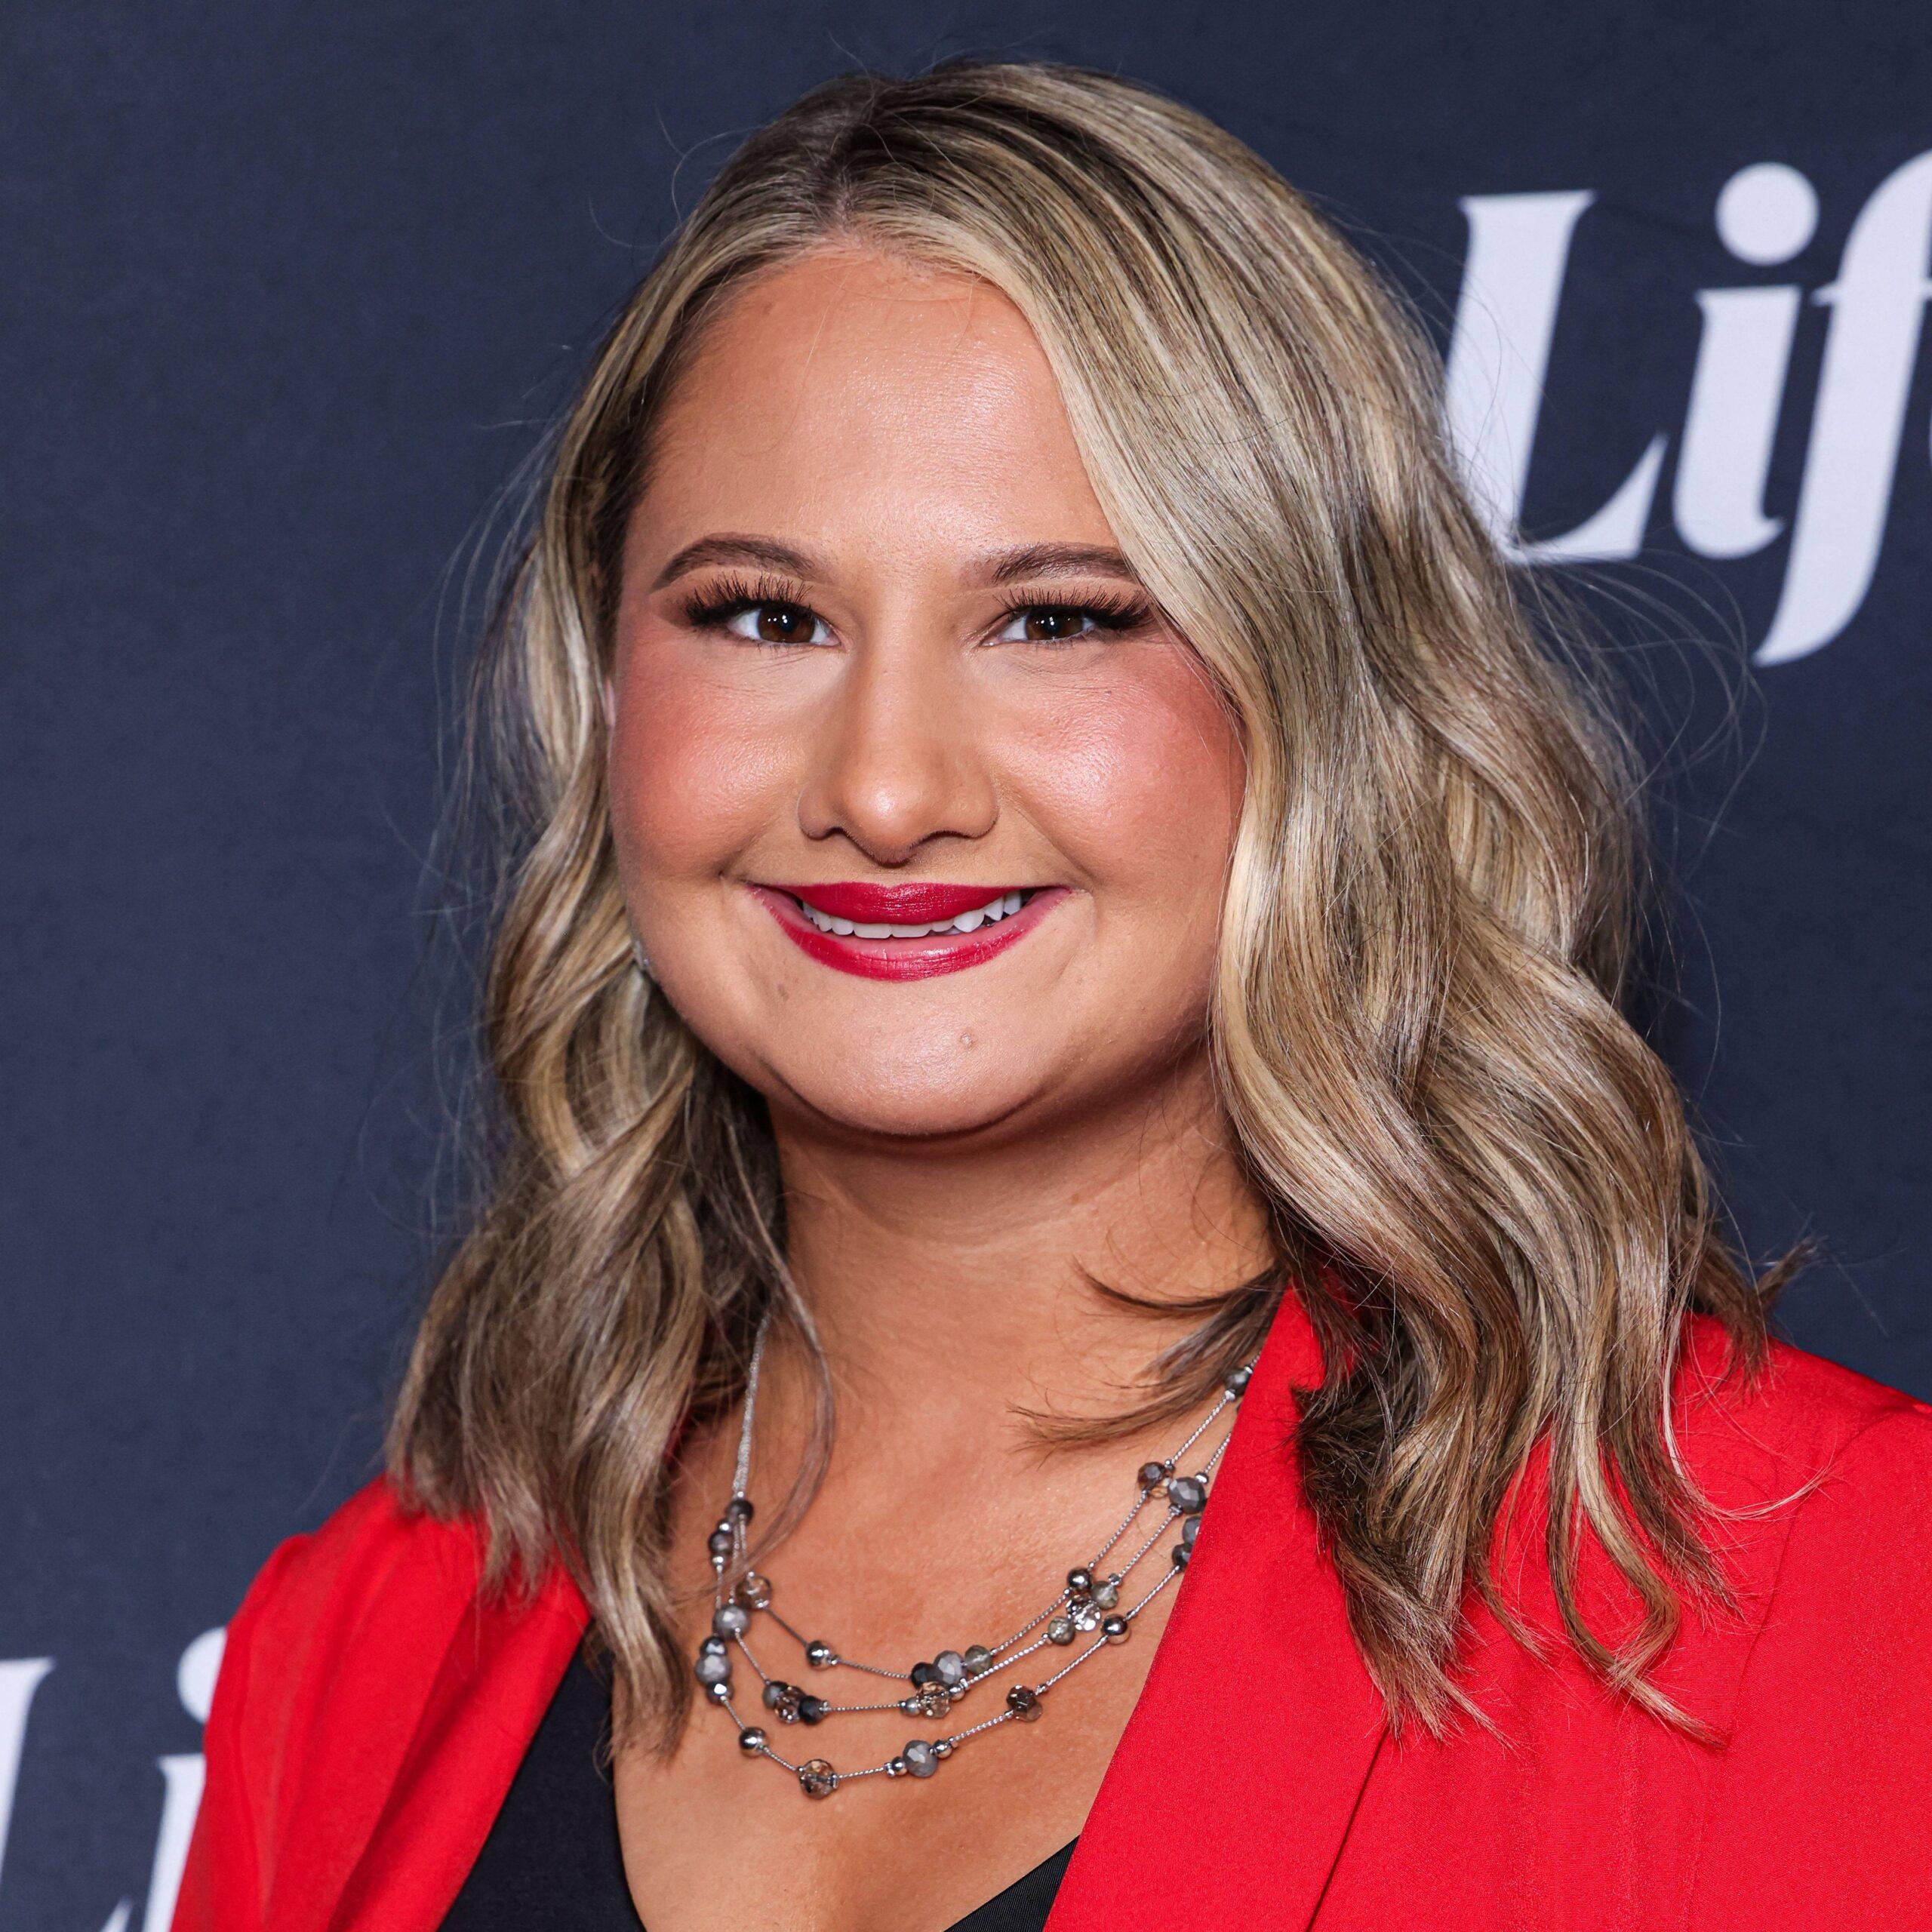 Gypsy Rose Blanchard Says The Media Has Had A 'Negative Effect' On Her Mental Health